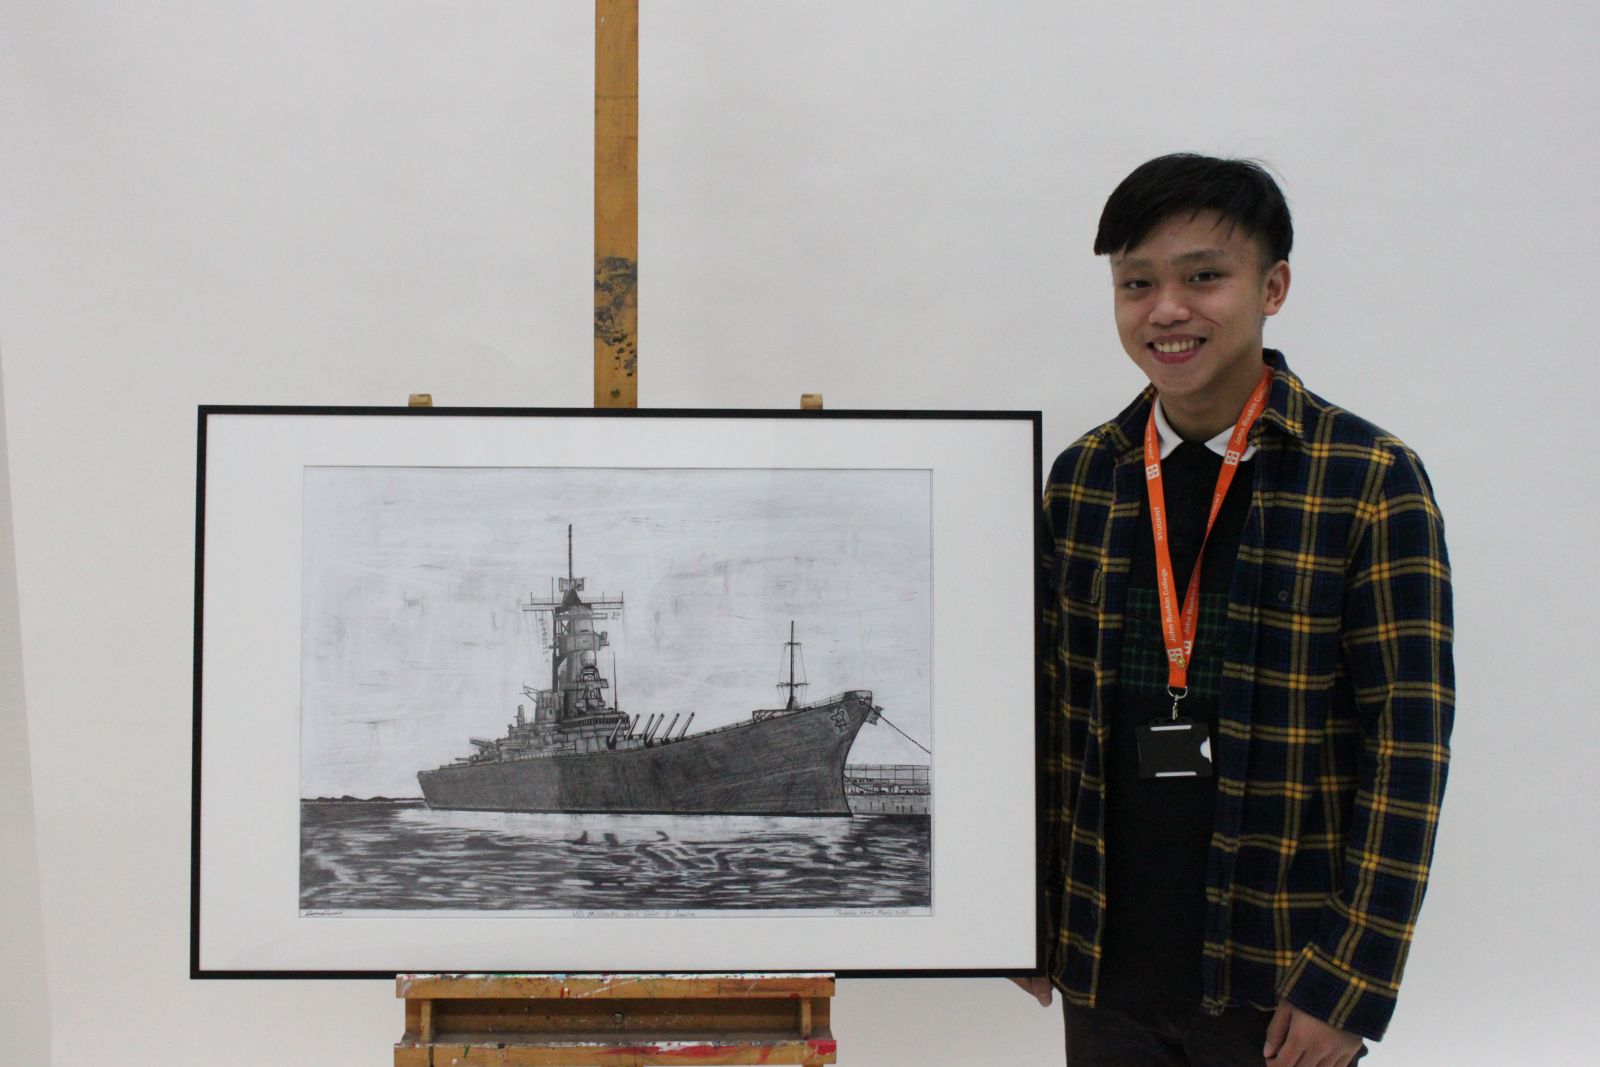 Boy standing next to black and white drawing of a ship on an easel